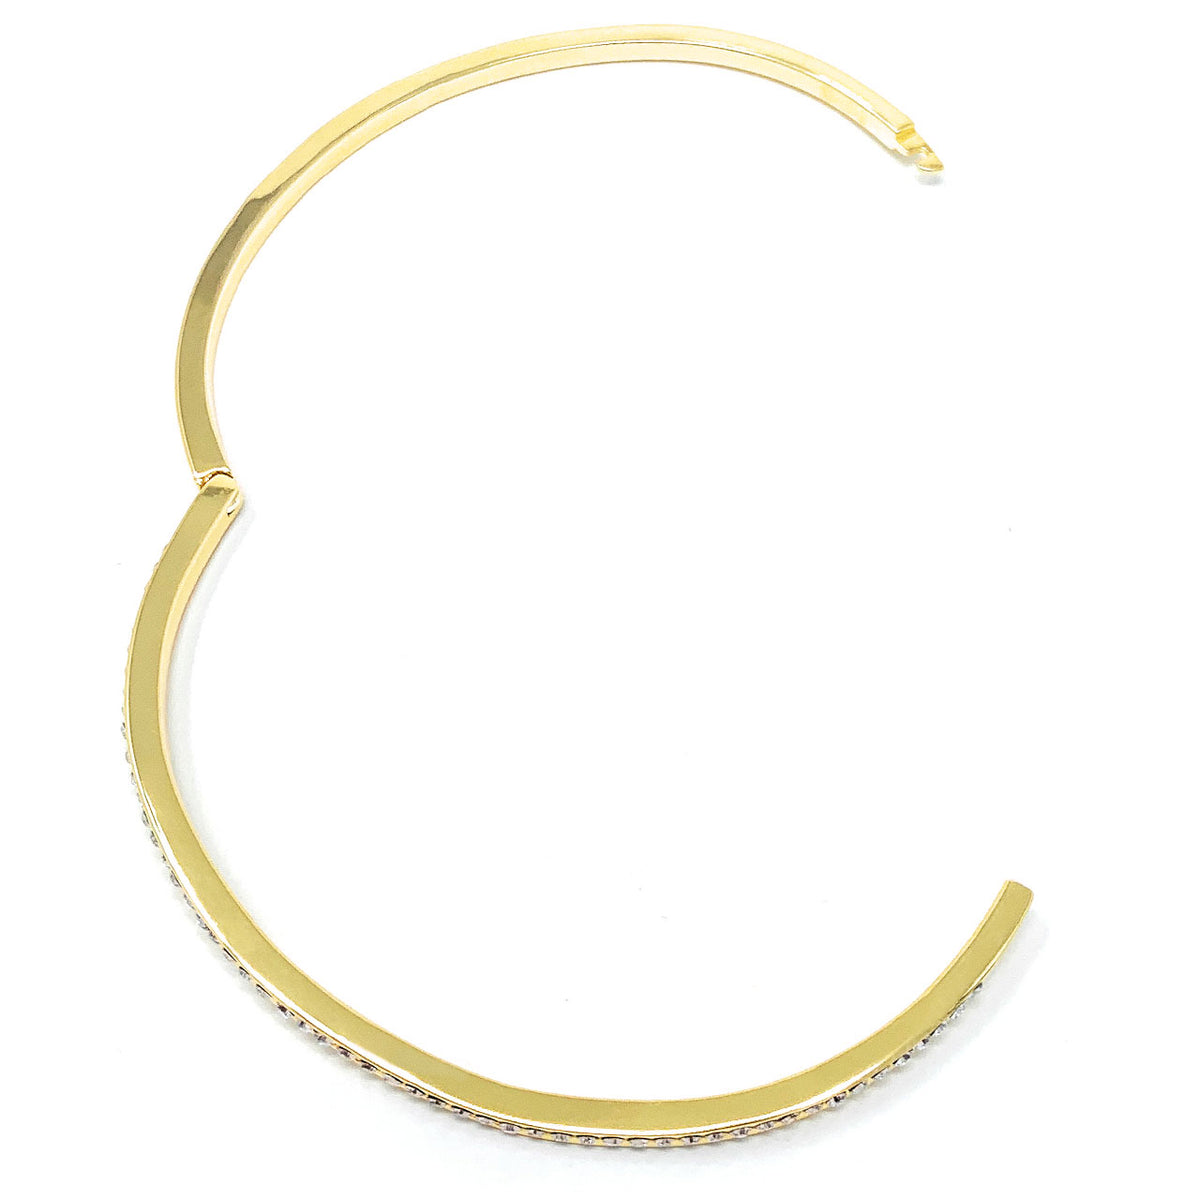 Amelia Pave Bangle Bracelet with White Clear Round Crystals from Swarovski Gold Plated - Ed Heart